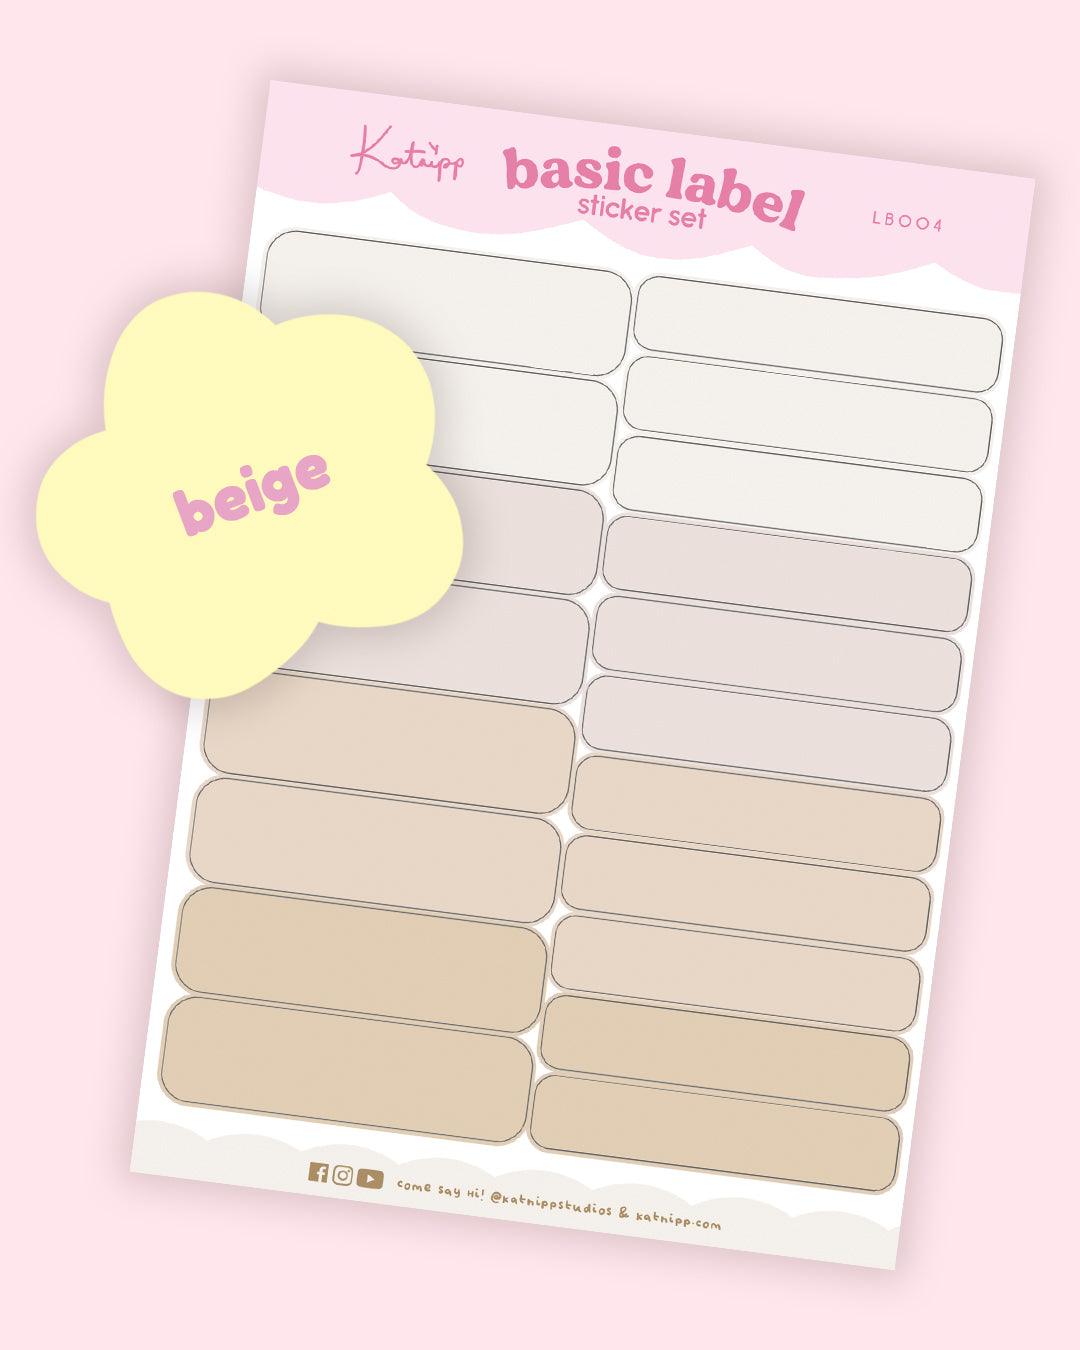 Charming Organisation Label Stickers with vibrant designs, ideal for decluttering and categorising your space. 5